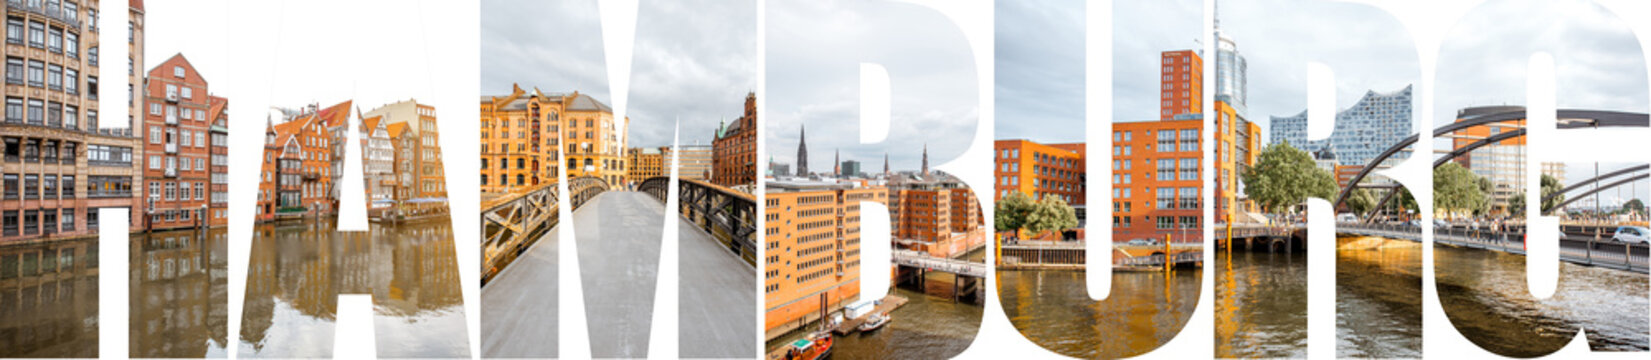 HAMBURG letters filled with pictures of famous places and cityscapes in Hamburg city, Germany